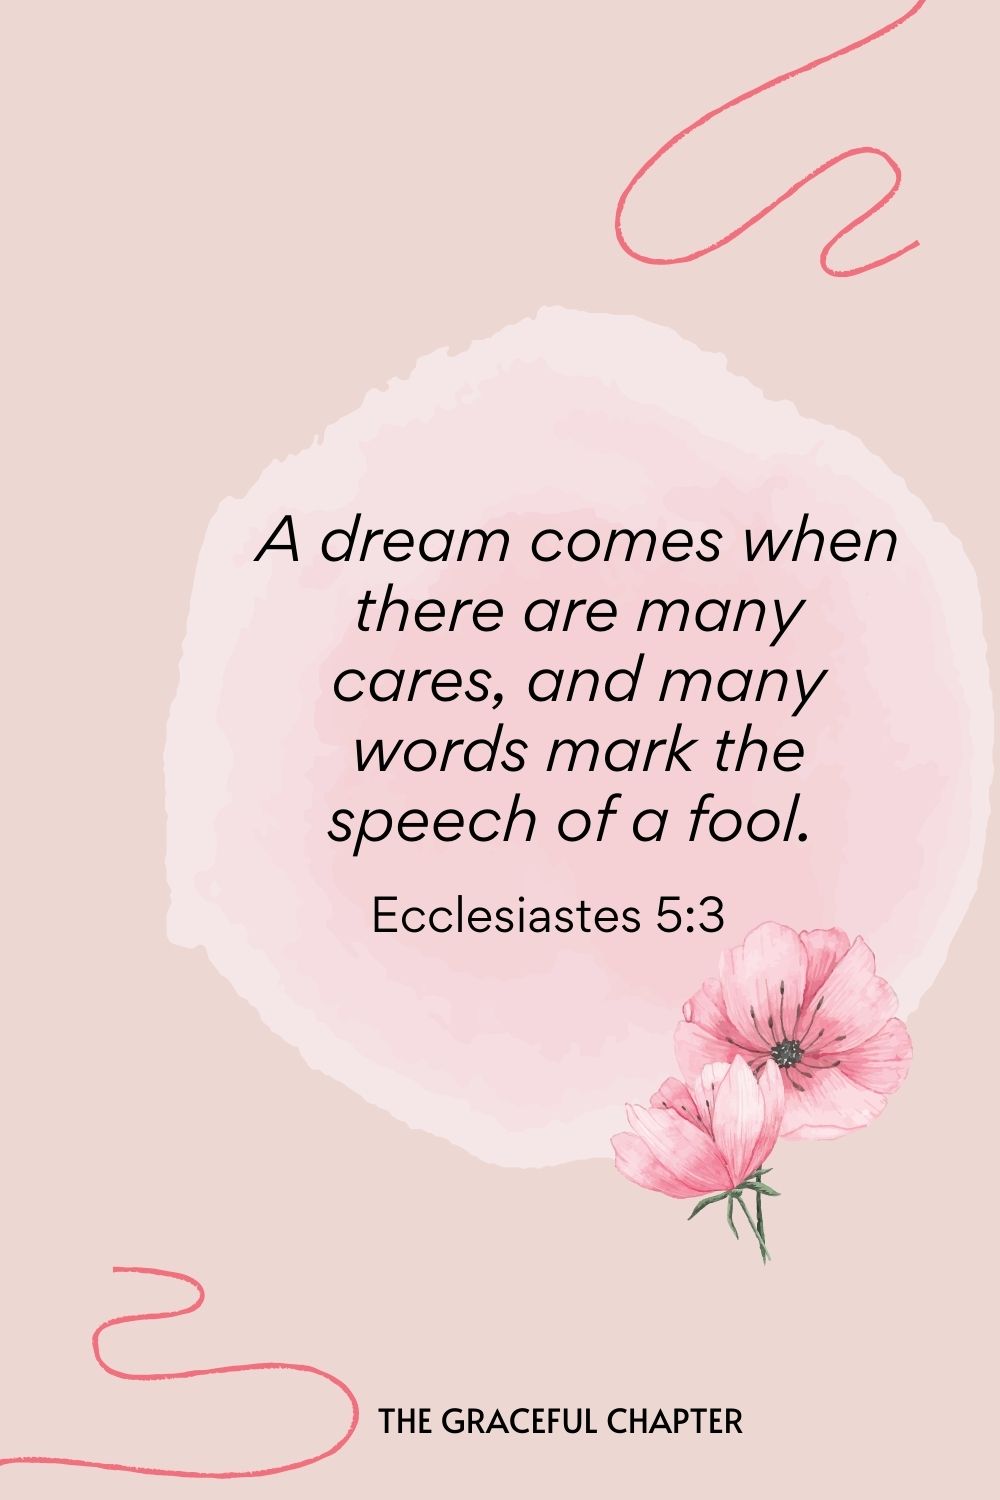 A dream comes when there are many cares, and many words mark the speech of a fool. Ecclesiastes 5:3